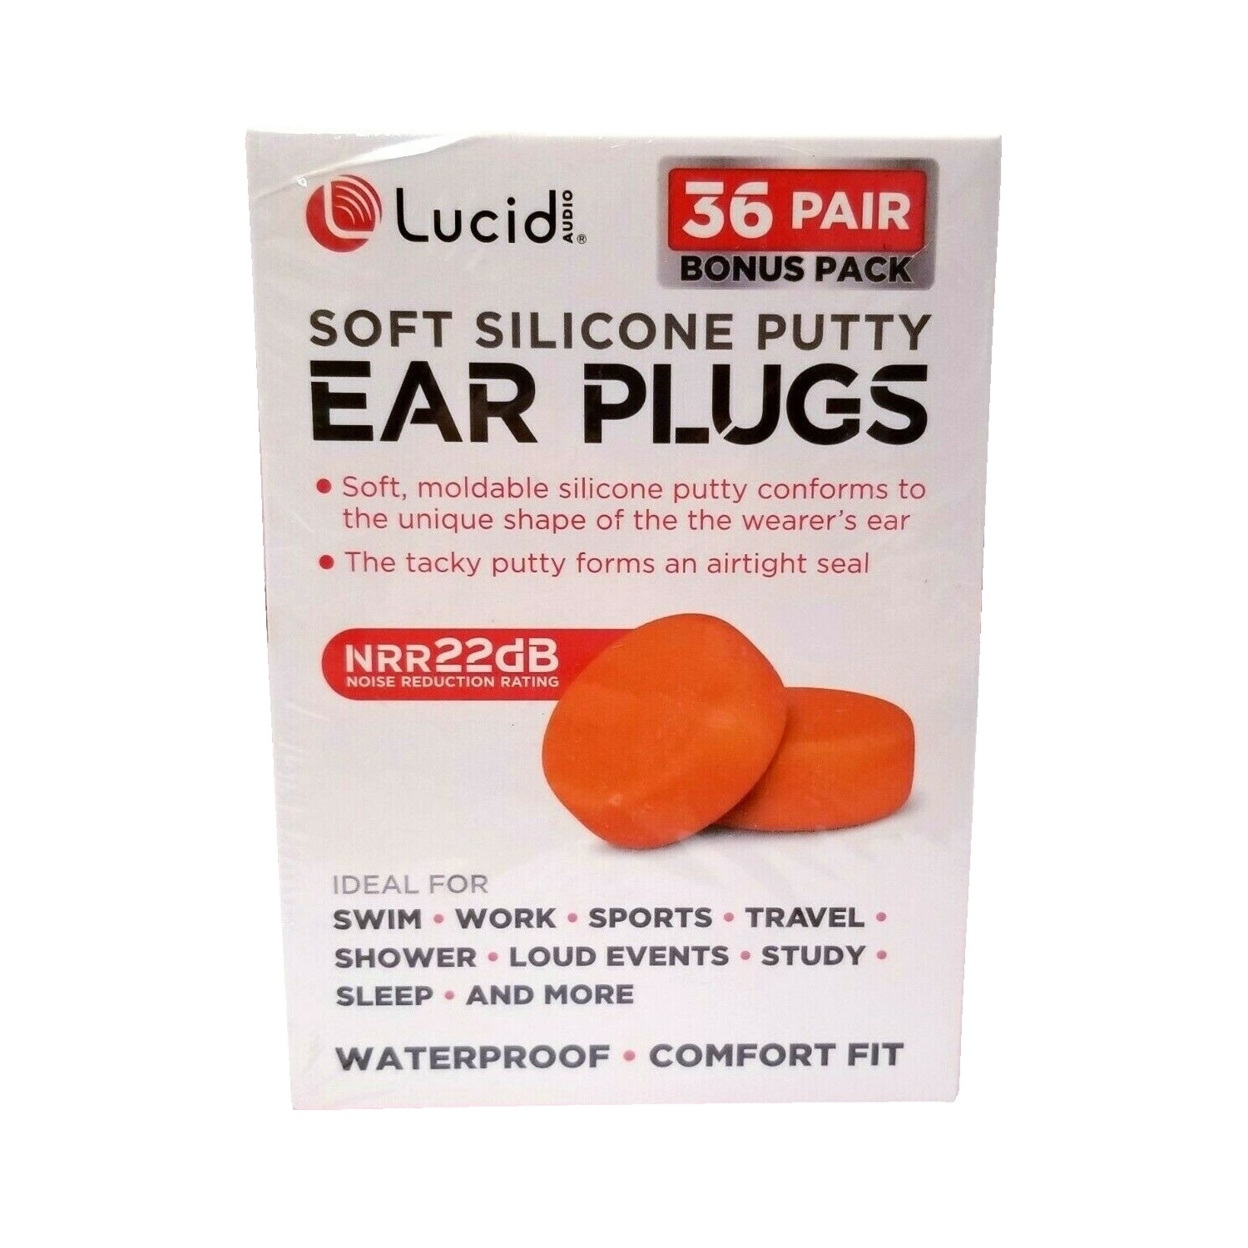 Lucid Audio Soft Silicone Putty Ear Plugs, 36 Pair